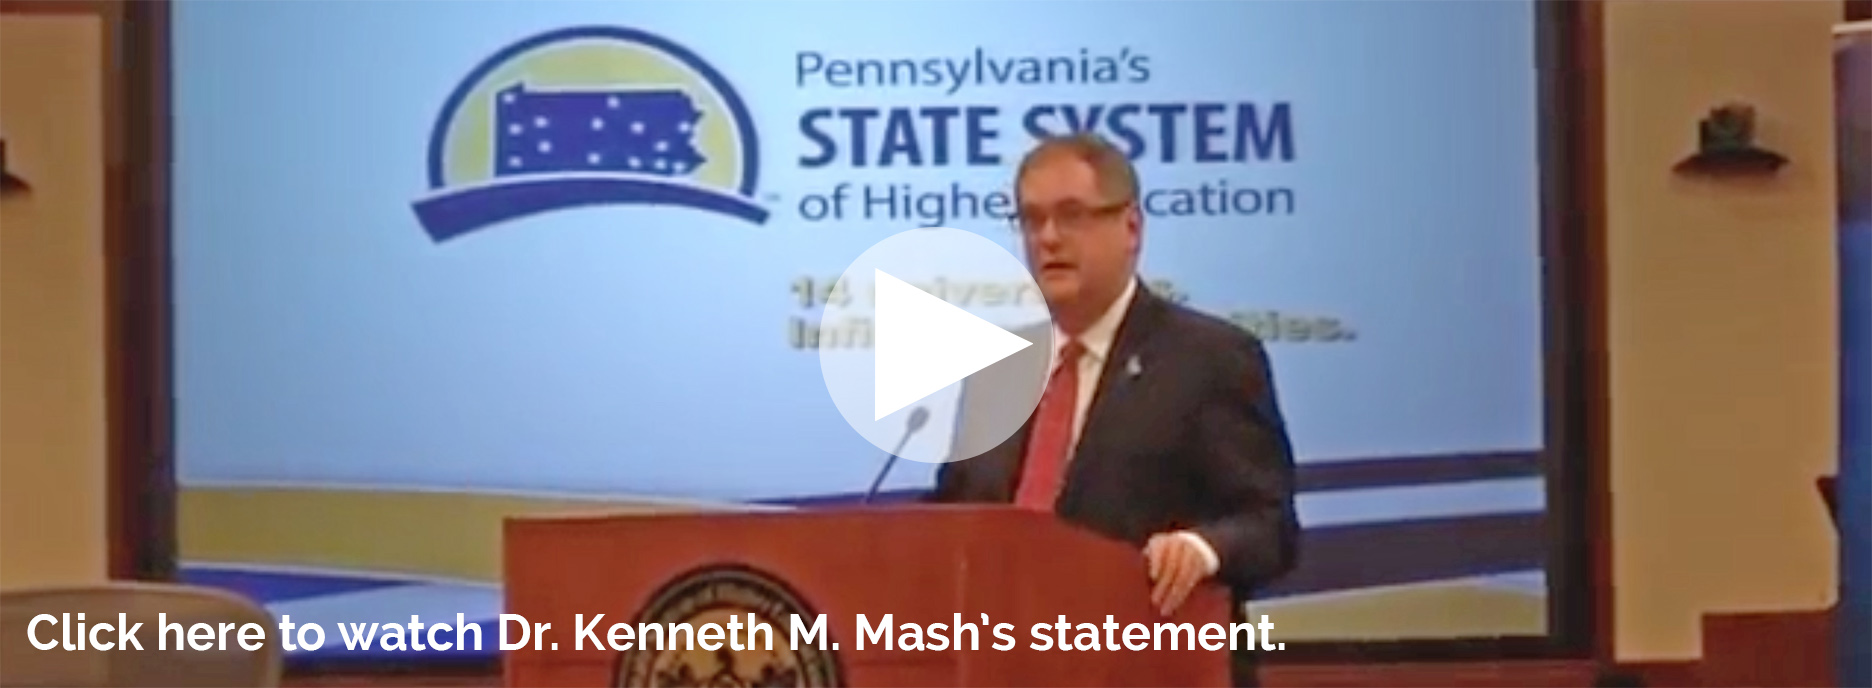 Watch Dr. Kenneth M. Mash's comments